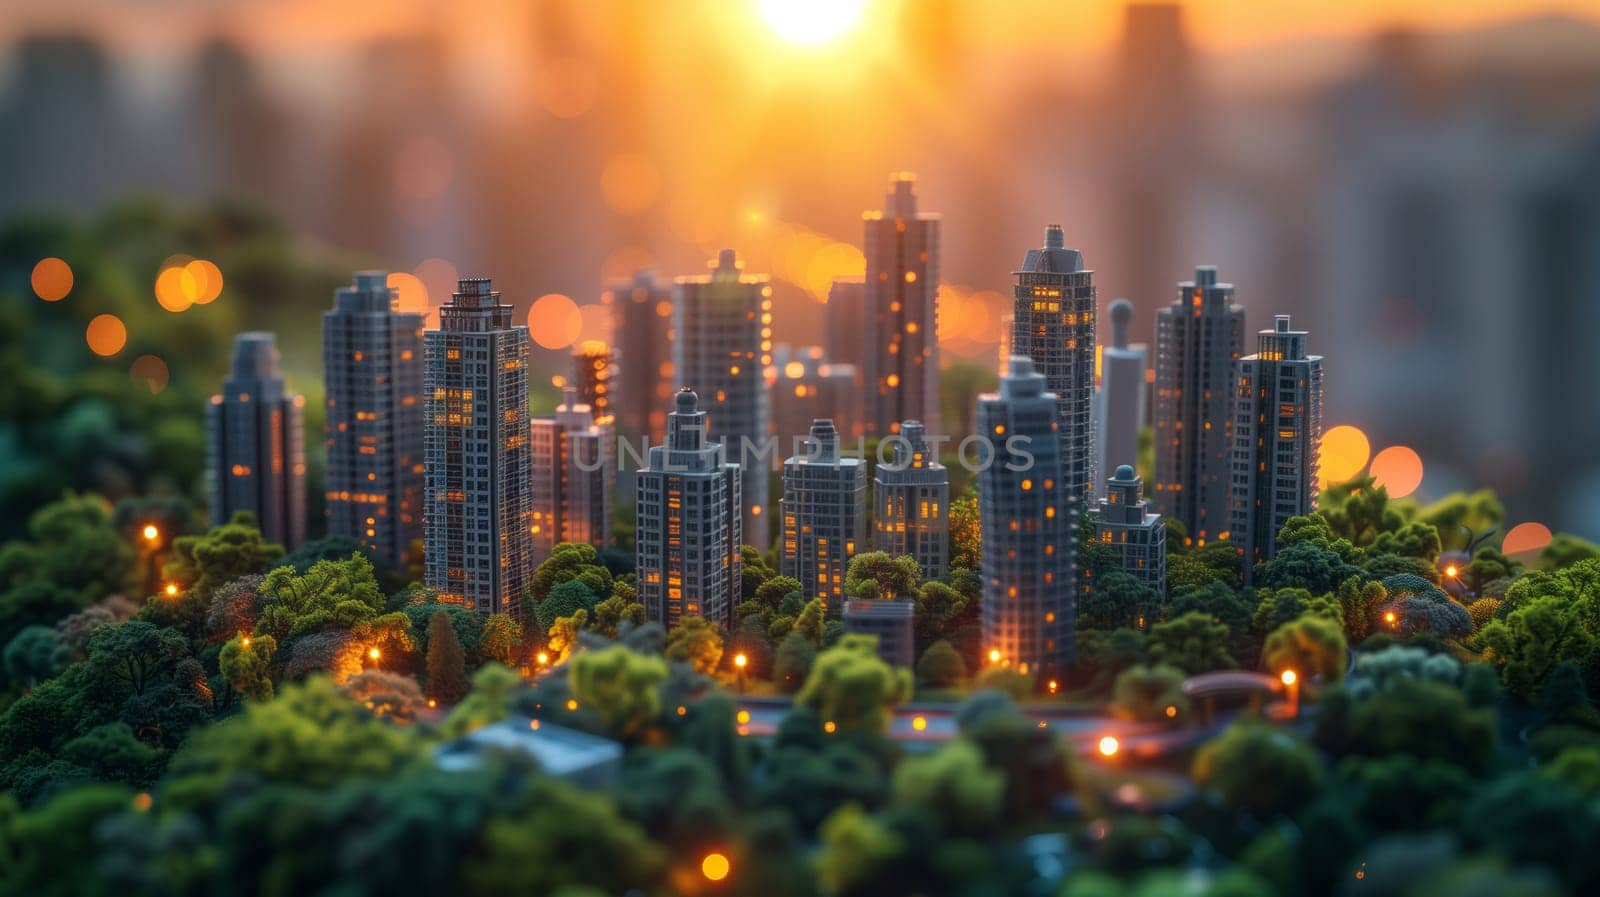 A city filled with skyscrapers and tower blocks surrounded by lush trees and plants against a natural landscape at sunset, creating a stunning urban design